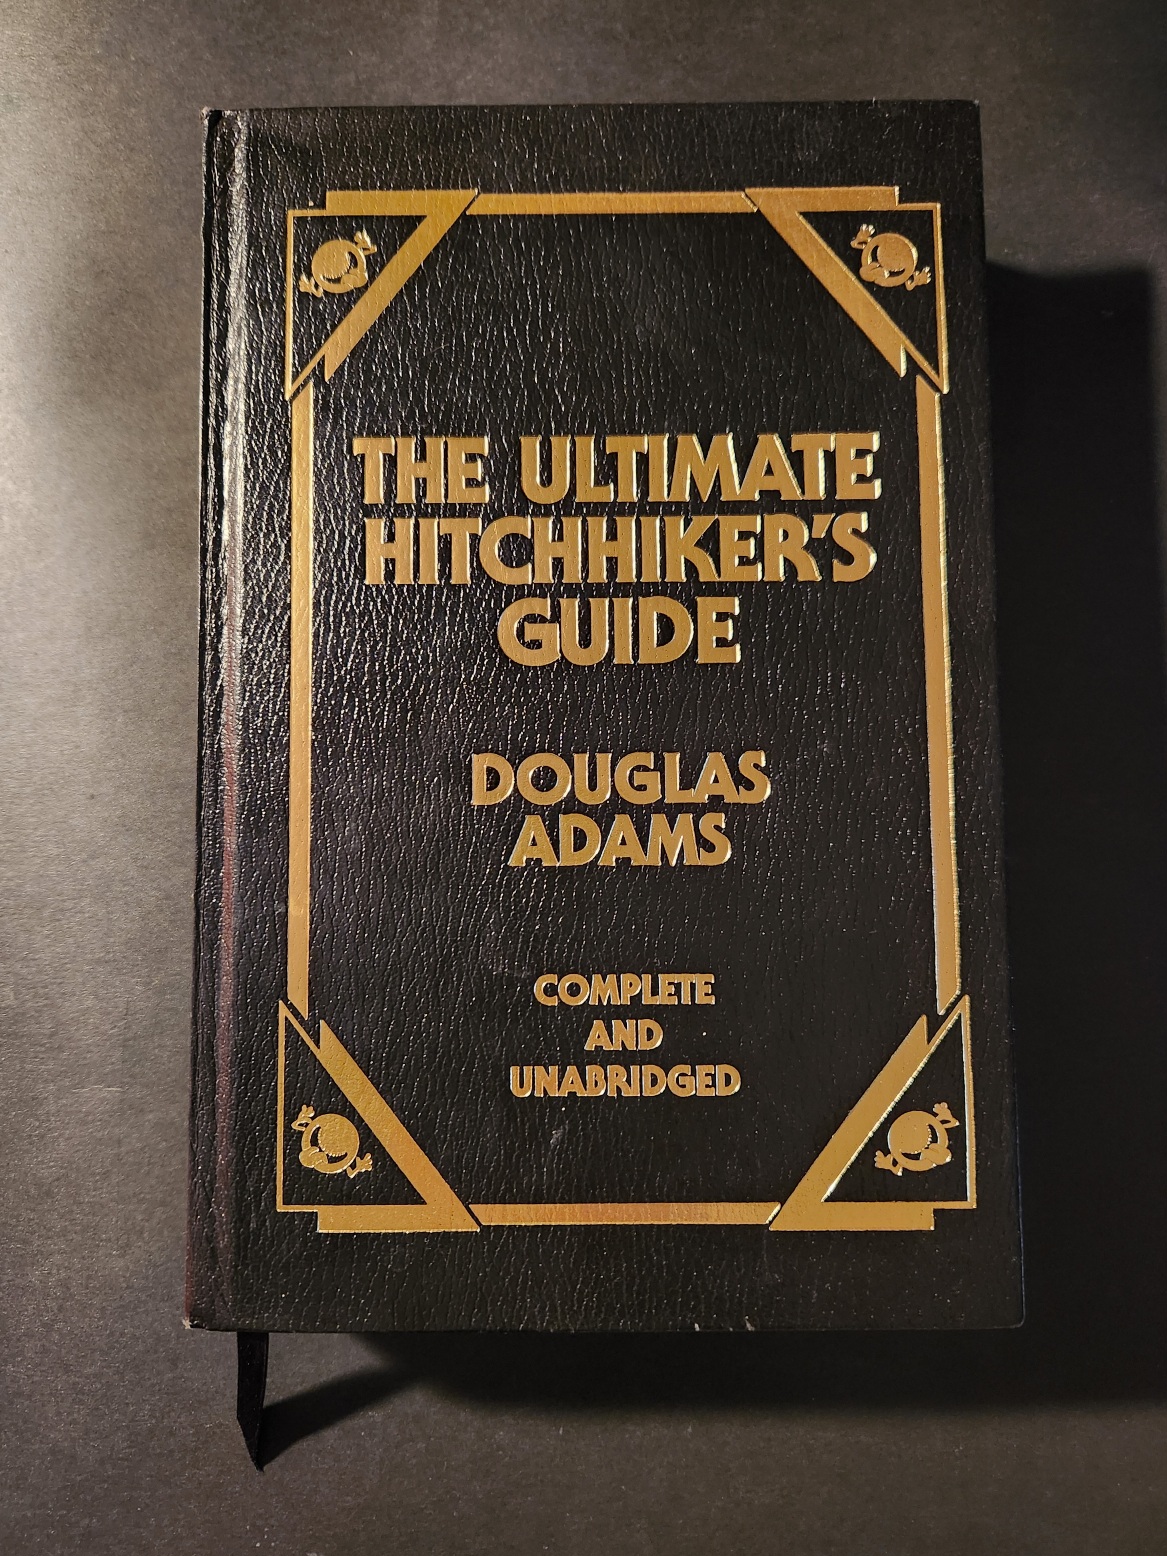 The Ultimate Hitchhiker's Guide by Douglas Adams Portland House Missprint Leatherbound 1986 Peter Cross Illustrations